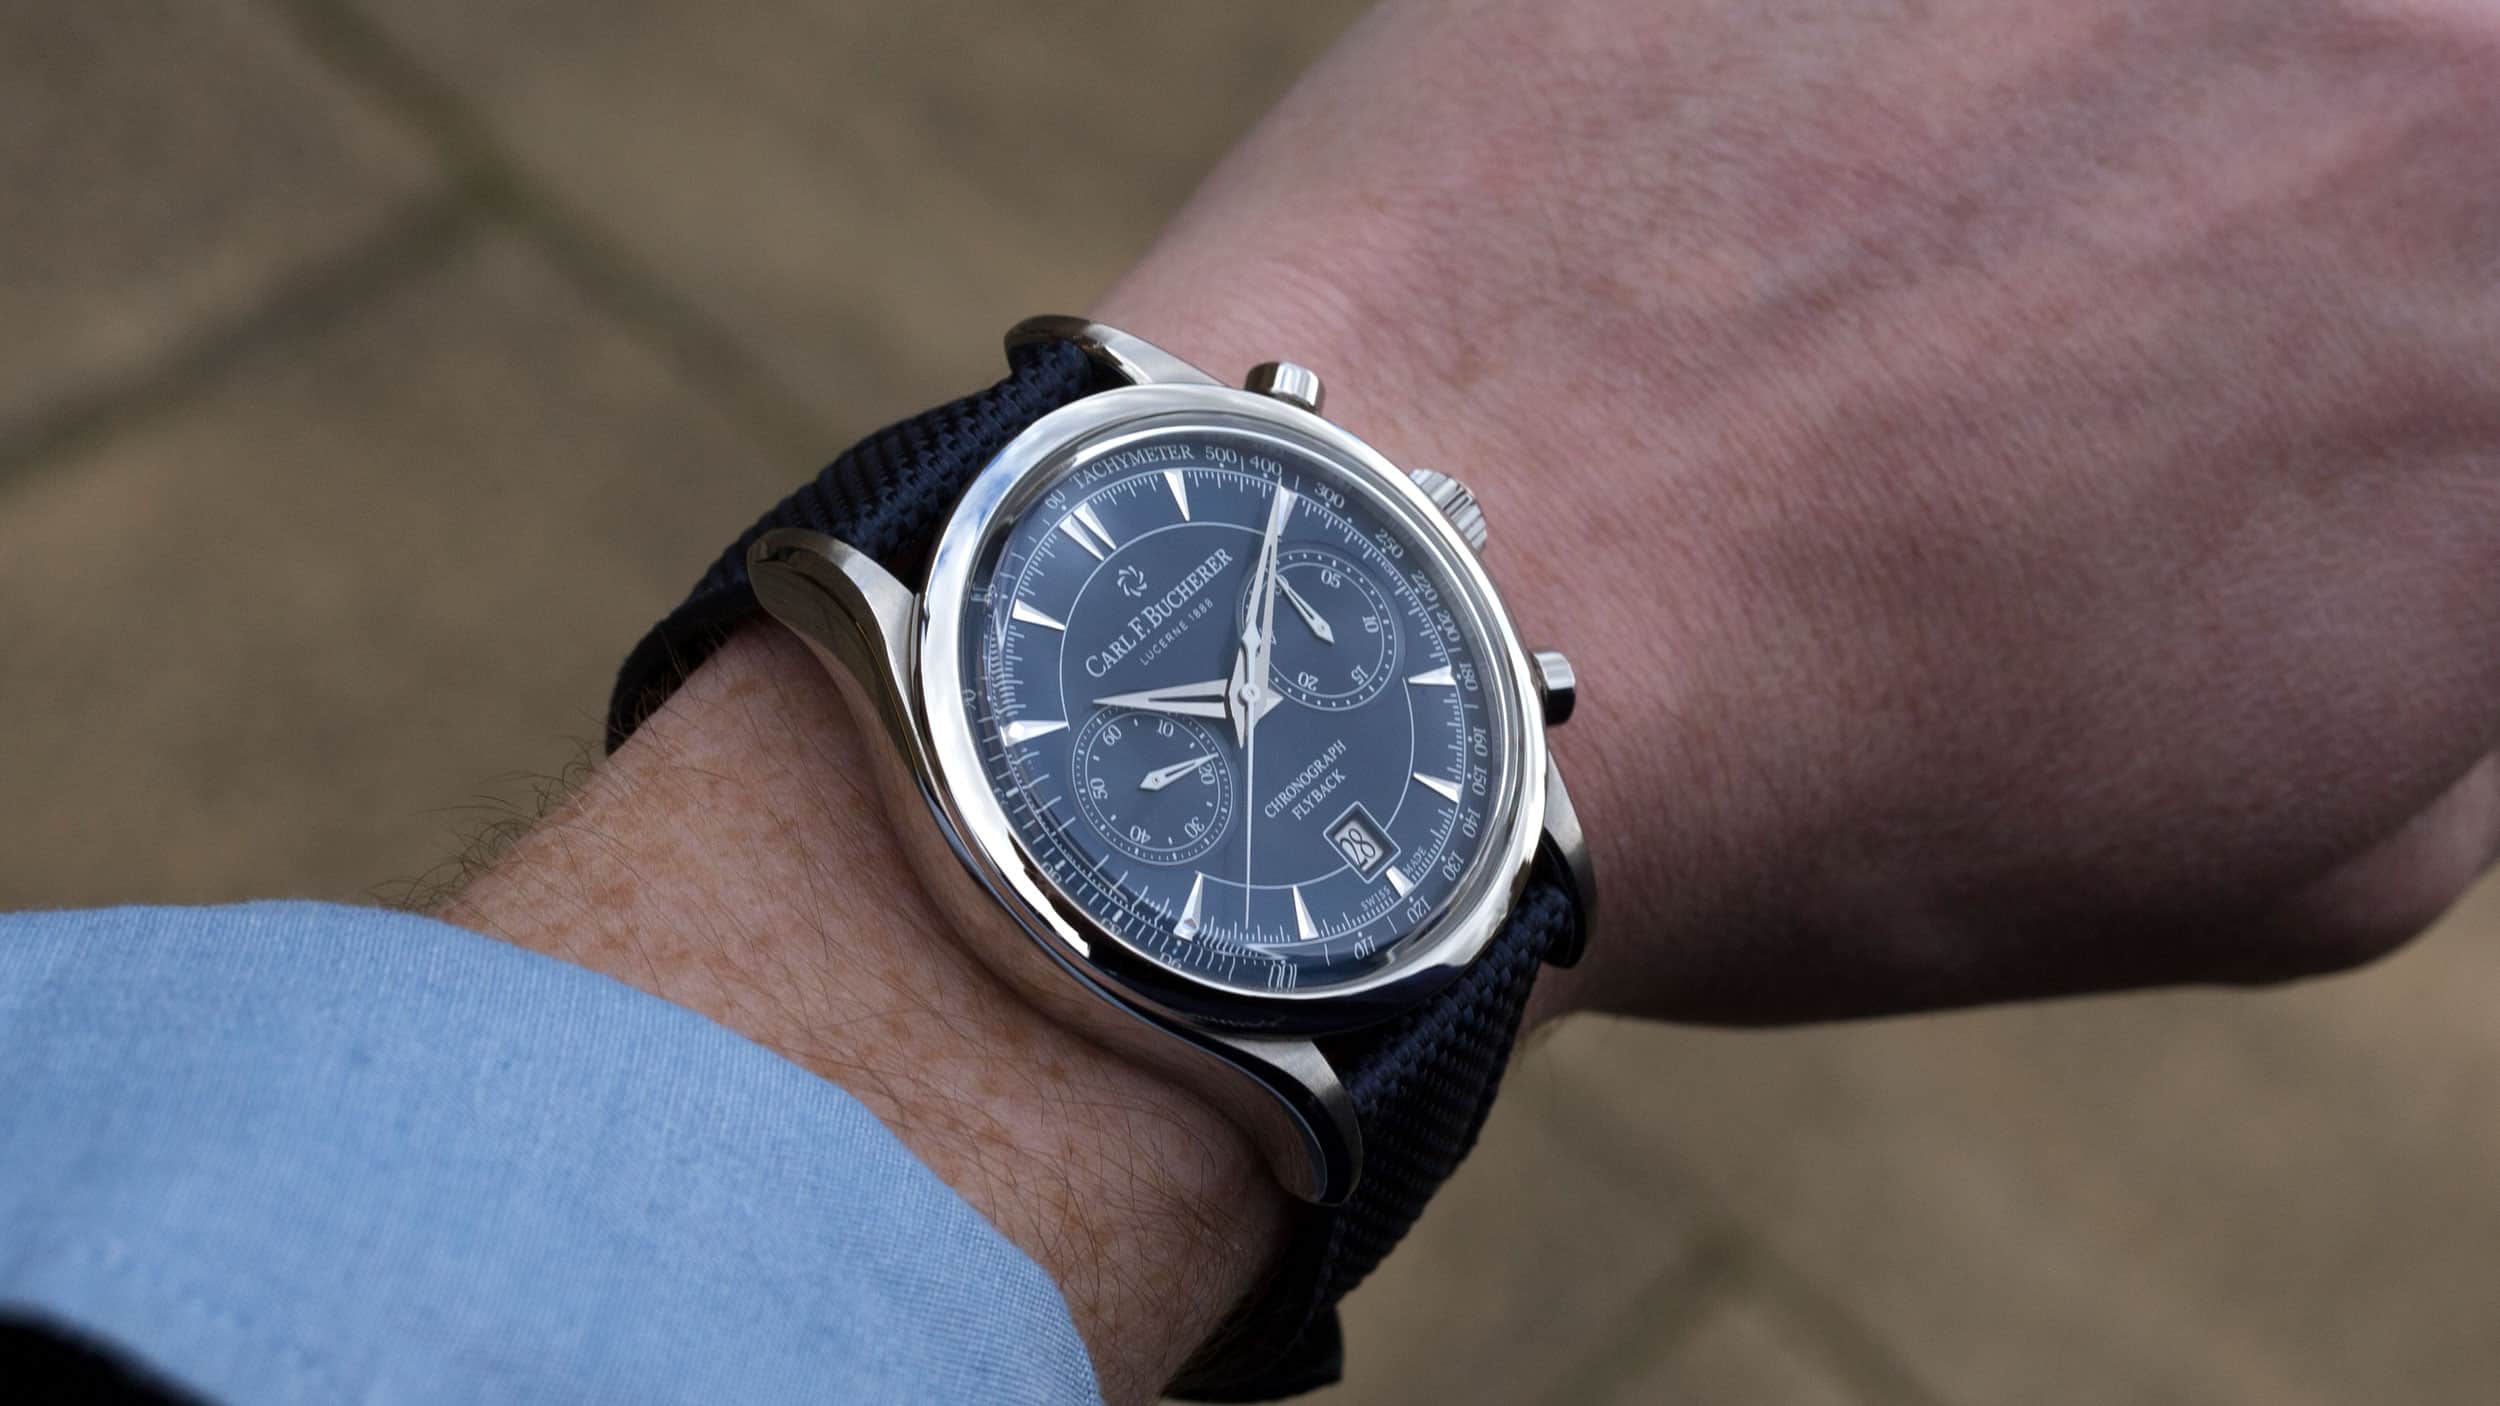 Carl F. Bucherer Manero Flyback gets a touch of blue sportiness